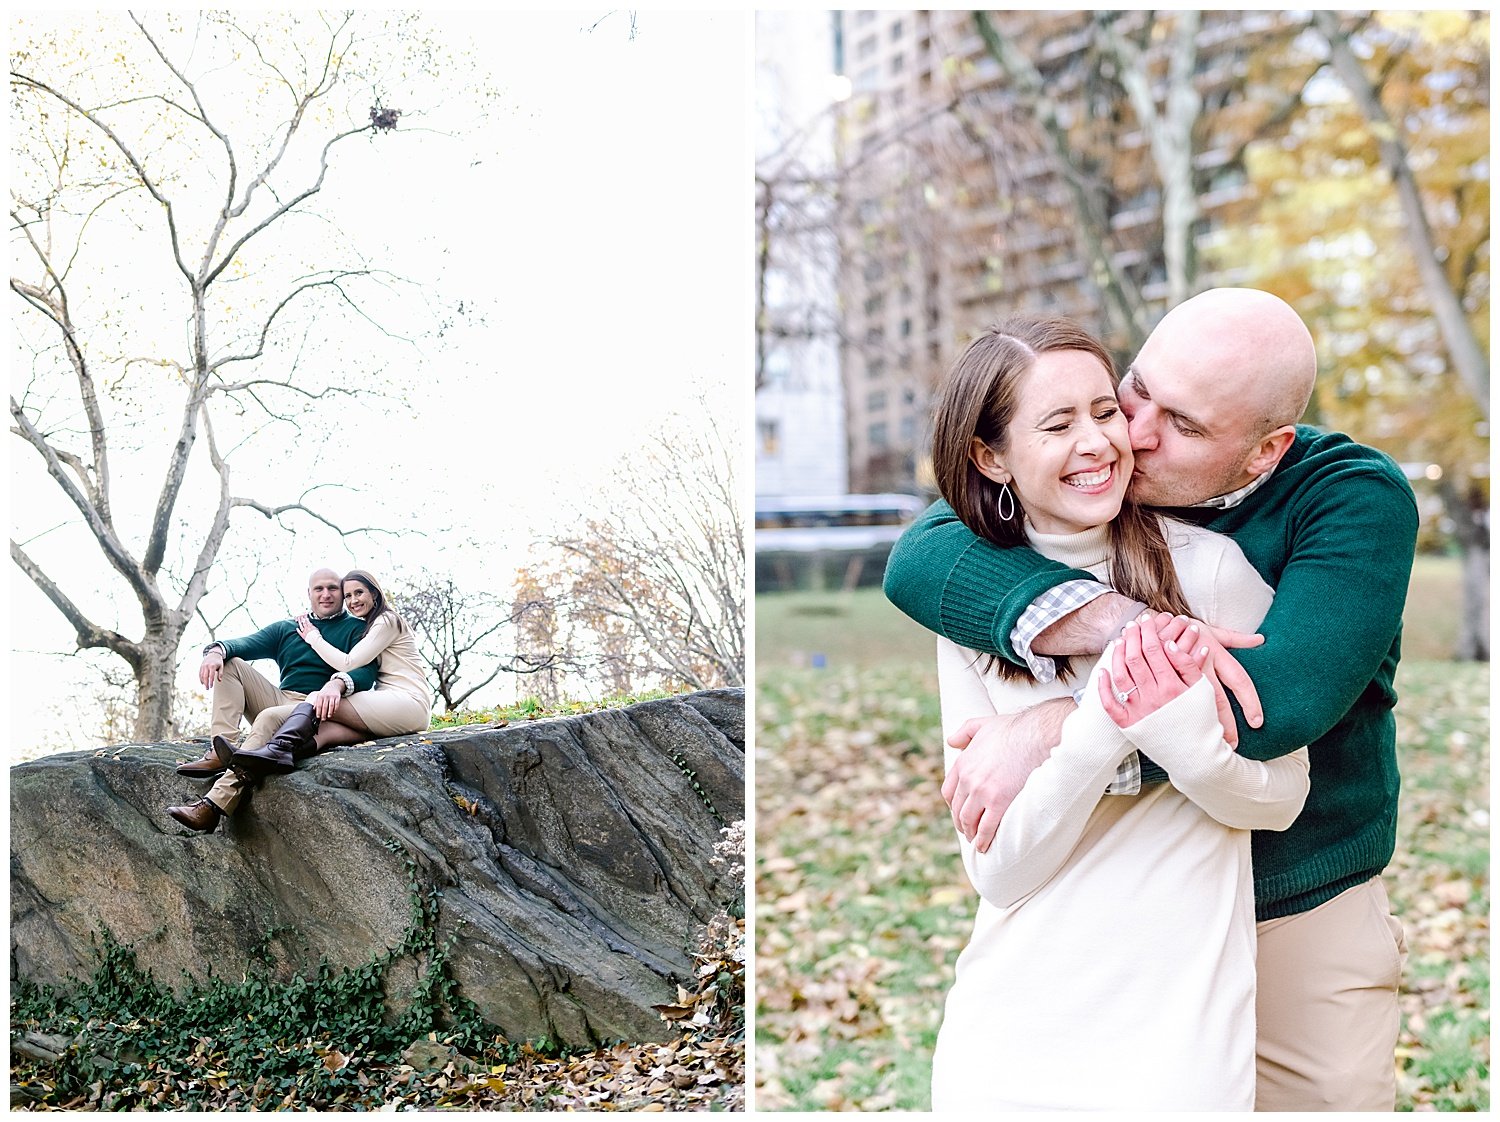 Kristin and Marc Engagement Session_2022.jpg